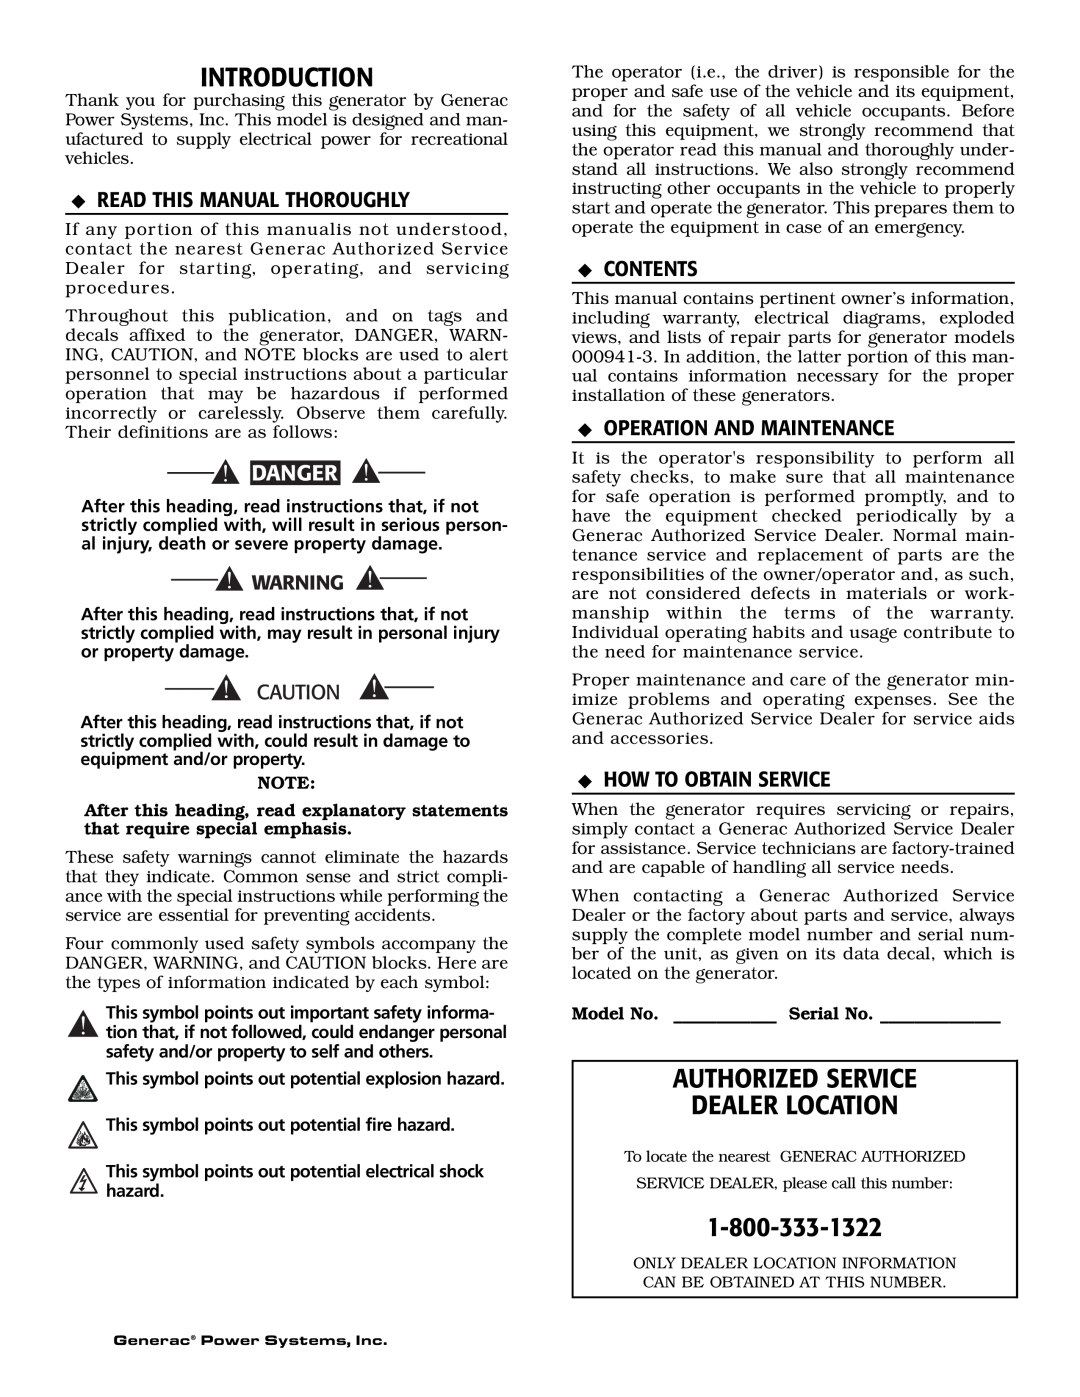 Generac 00941-3 Introduction, Authorized Service Dealer Location, Read This Manual Thoroughly, Danger, Contents 